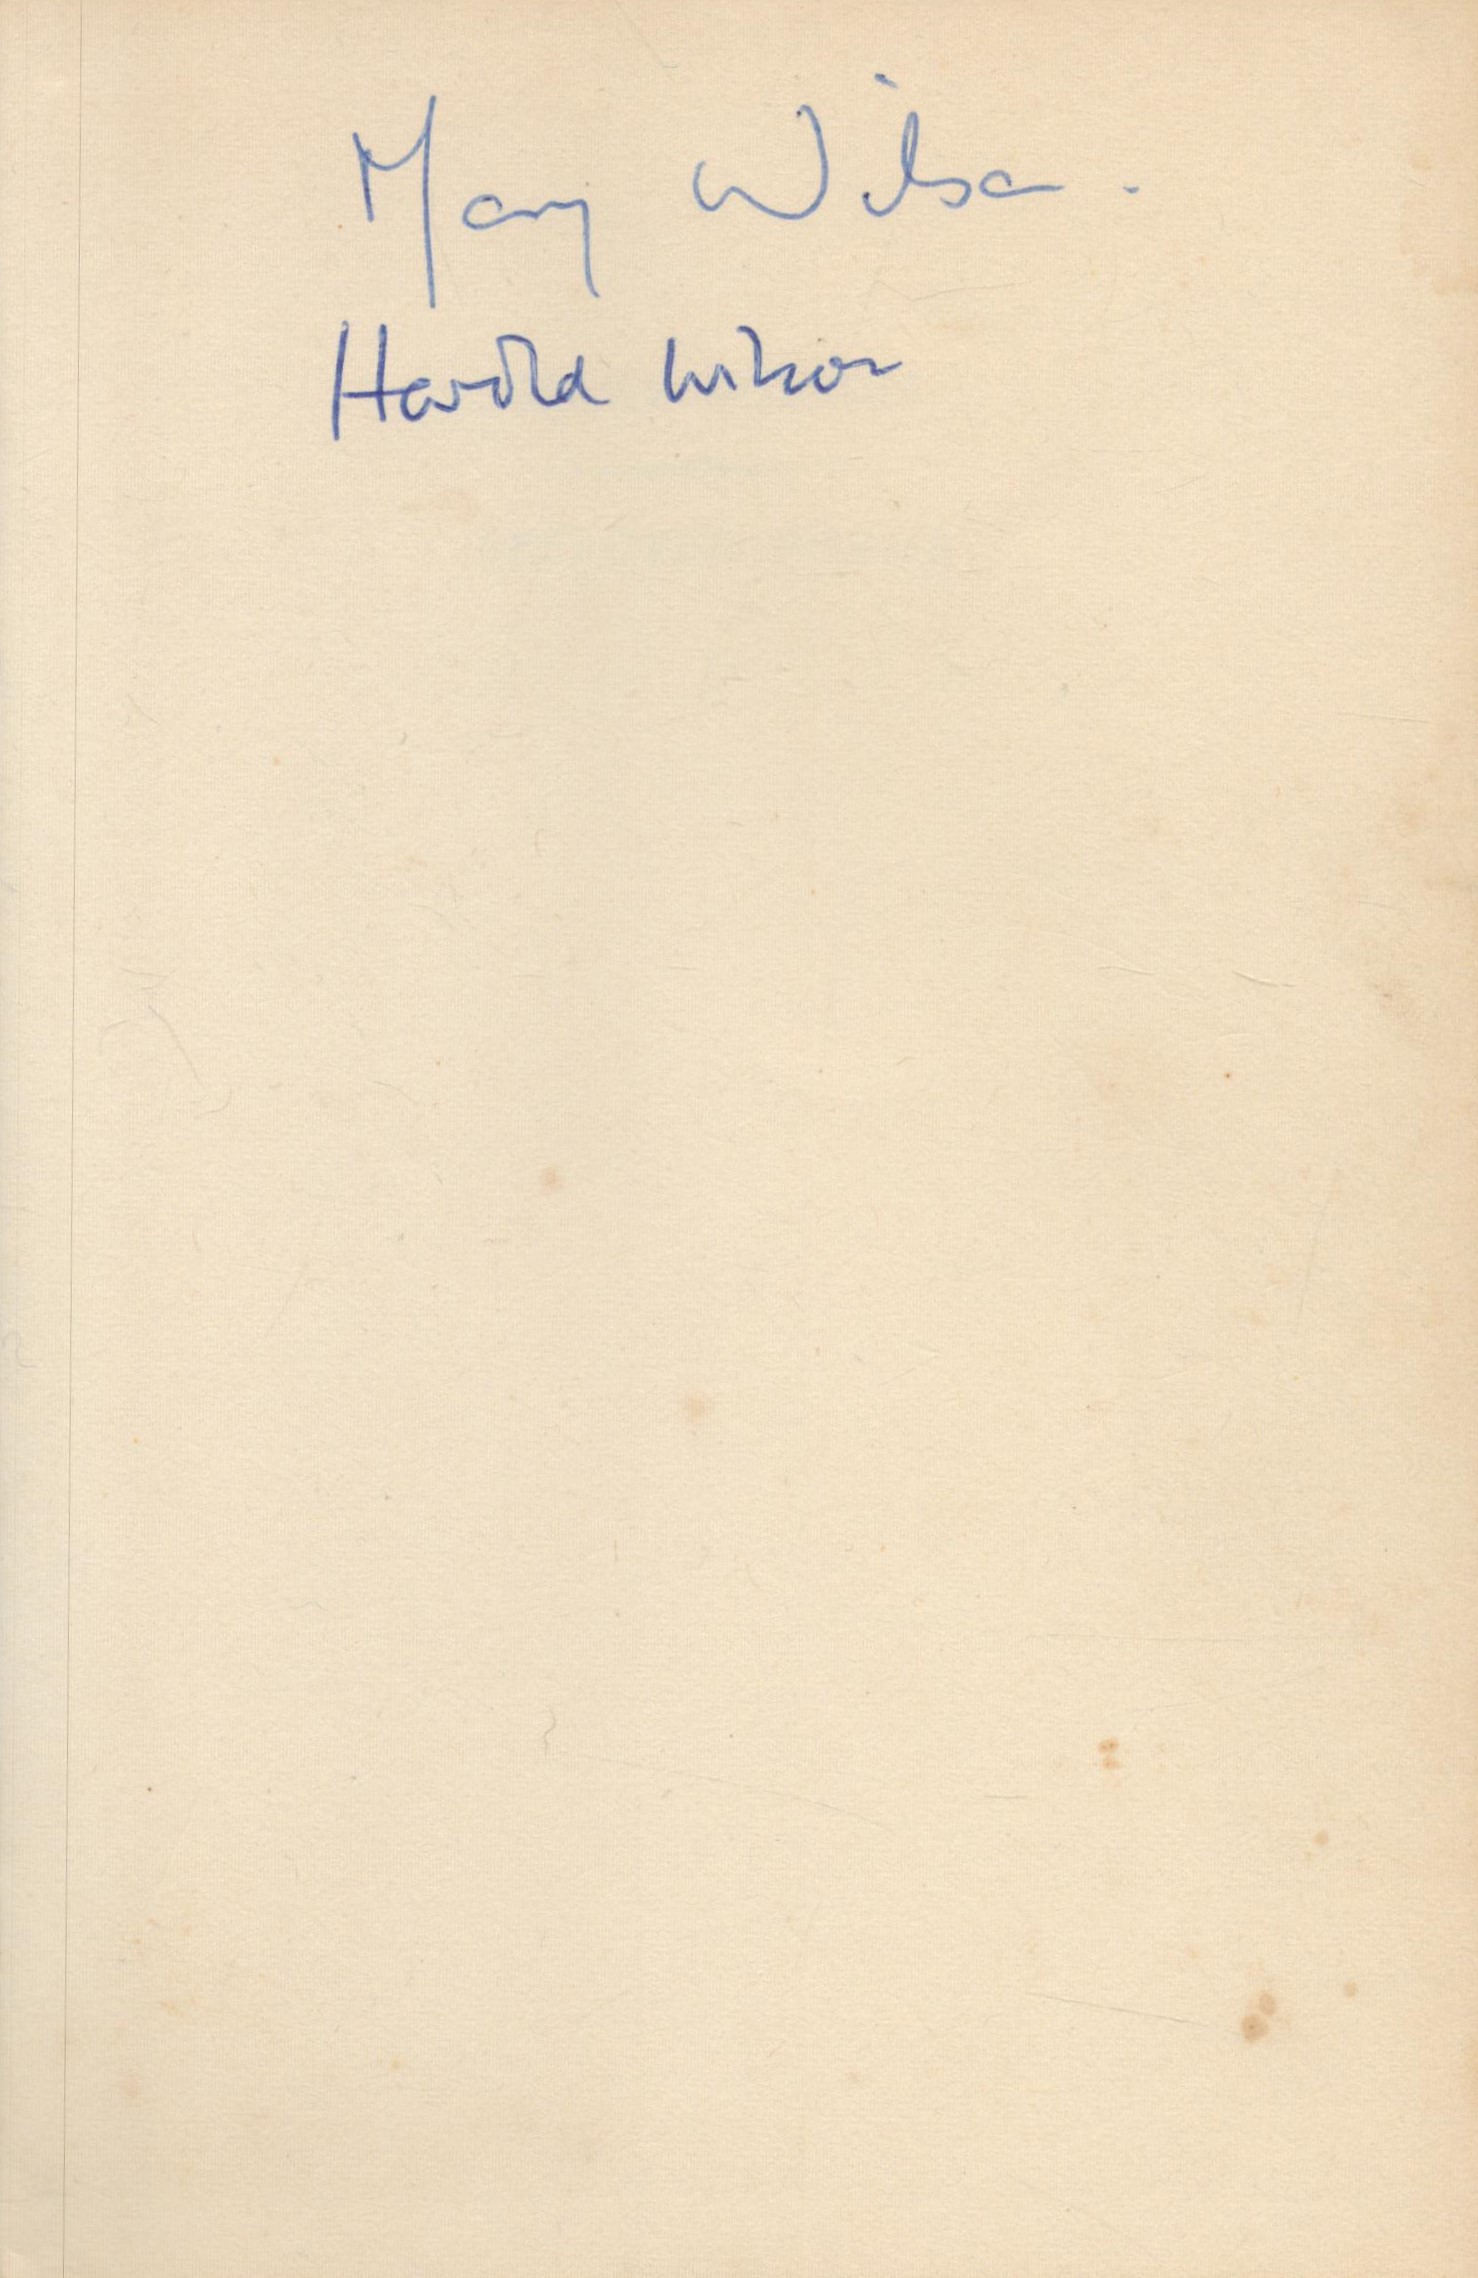 Mary Wilson Selected poems signed first edition hardback book 1970. Also signed by Harold Wilson. - Image 2 of 4